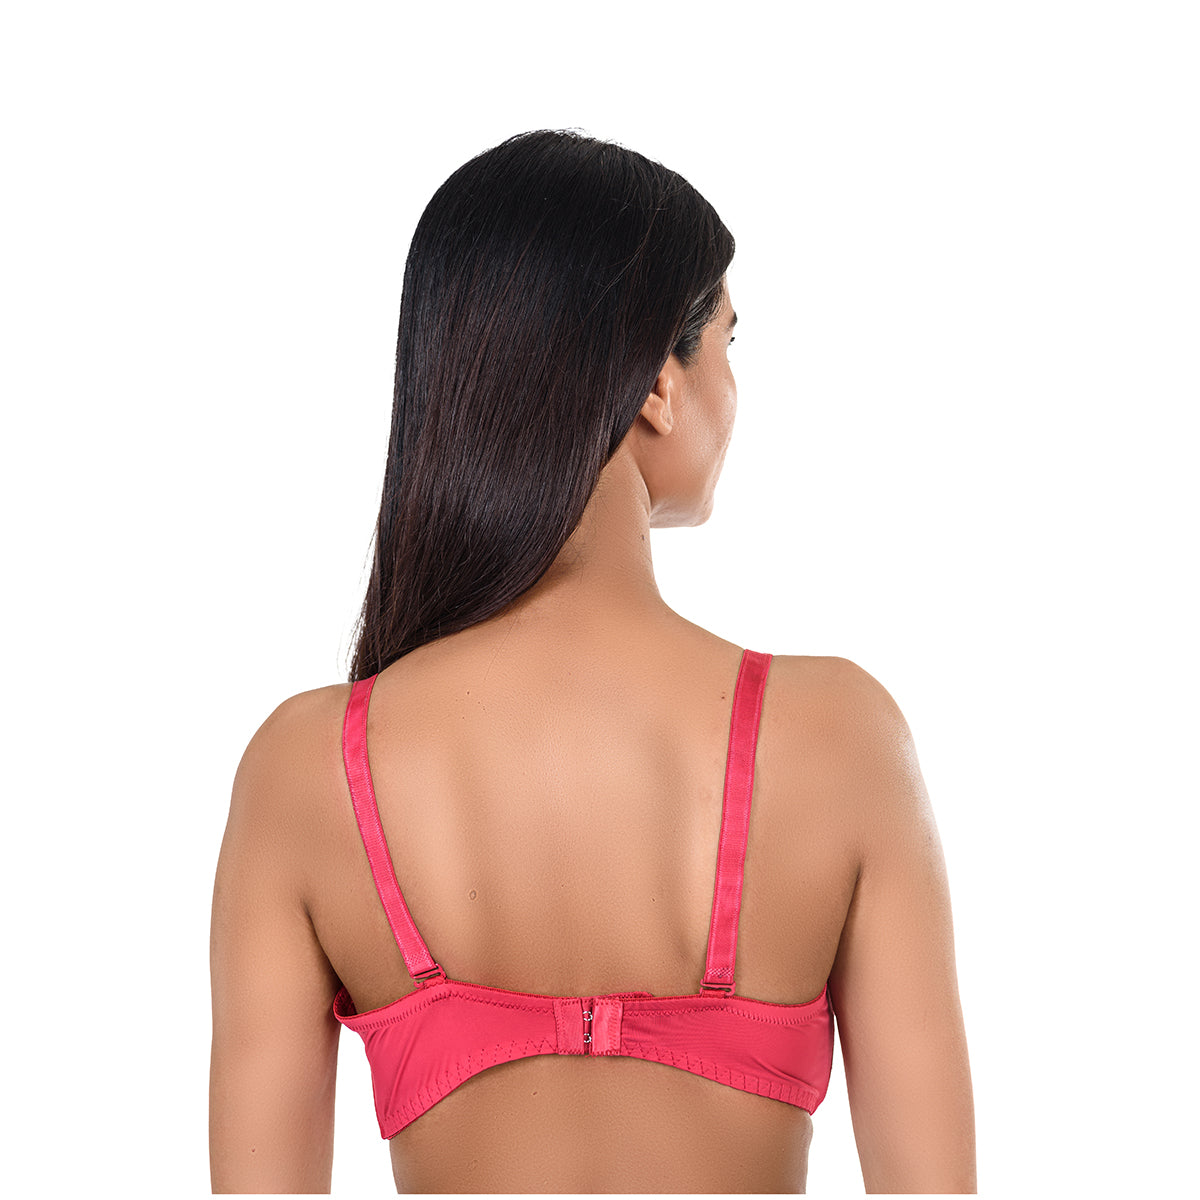 Trylo Rozi Stp Women Detachable Strap Non Wired Padded Bra - Red